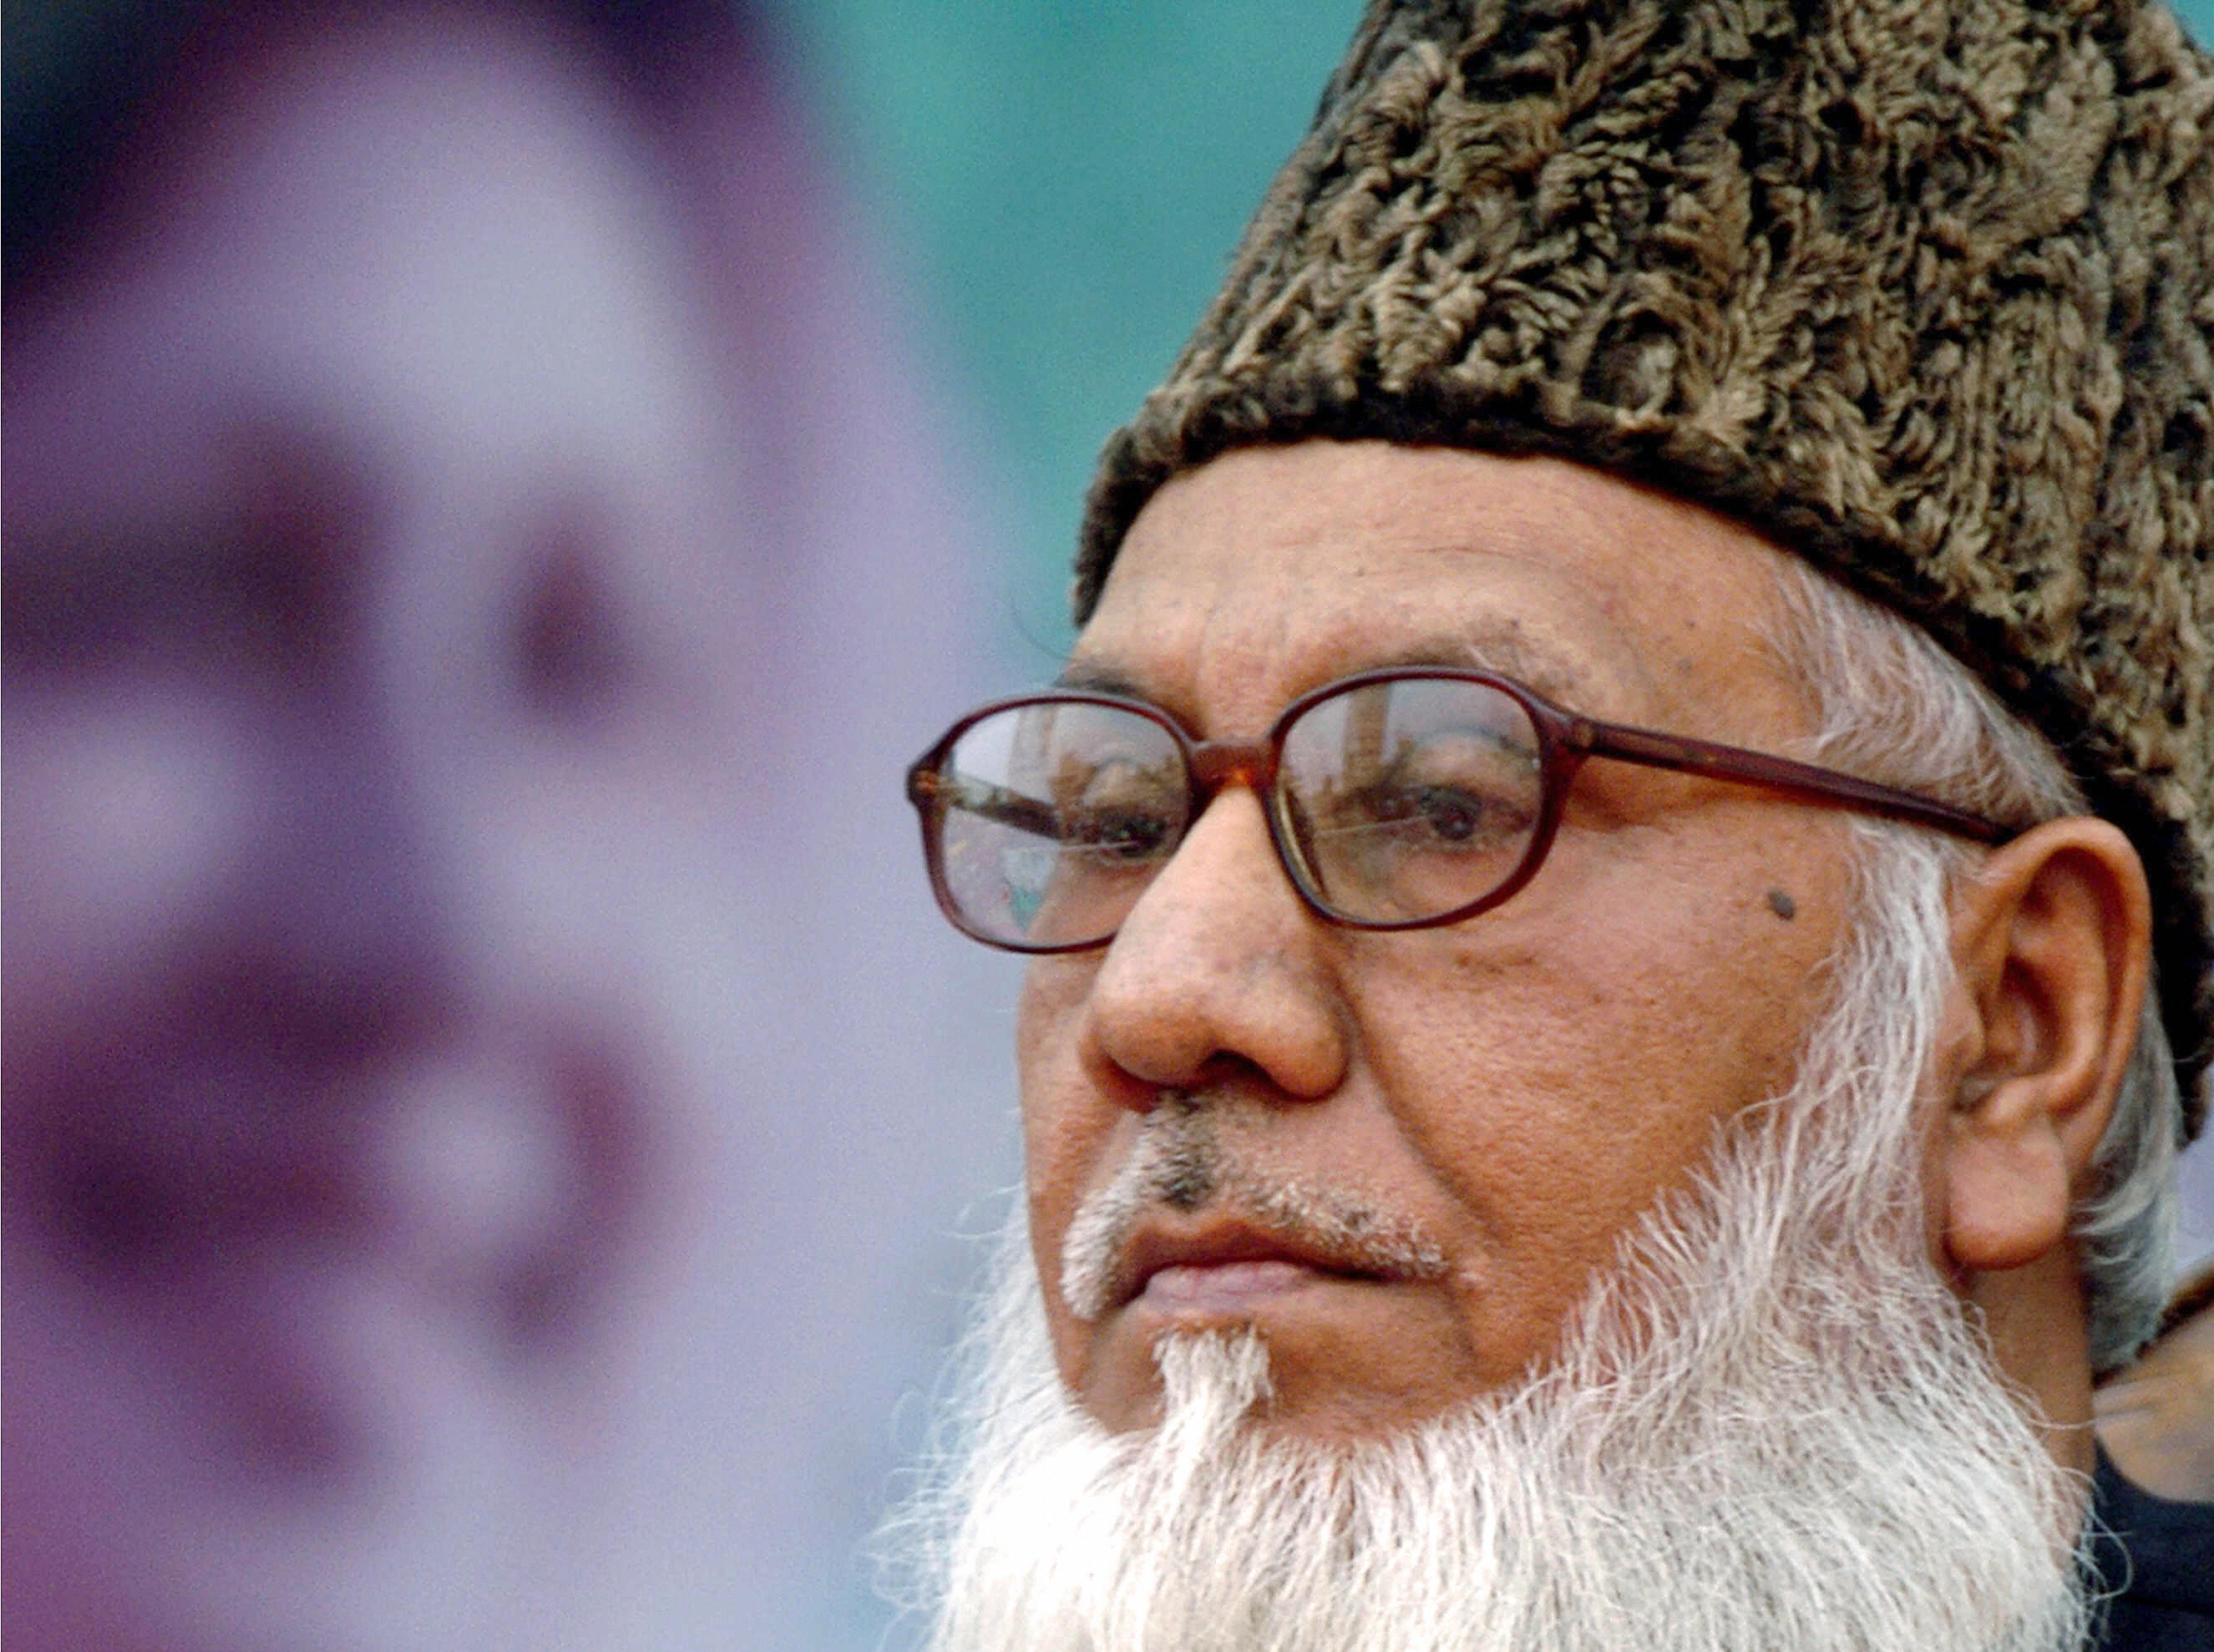 Former industries minister and leader of the Jamaat-e-Islami Islamic party in Bangladesh Motiur Rahman Nizami as he during a rally in Dhaka, Dec. 12, 2006 (Farjana Khan Godhuly—AFP/Getty Images)